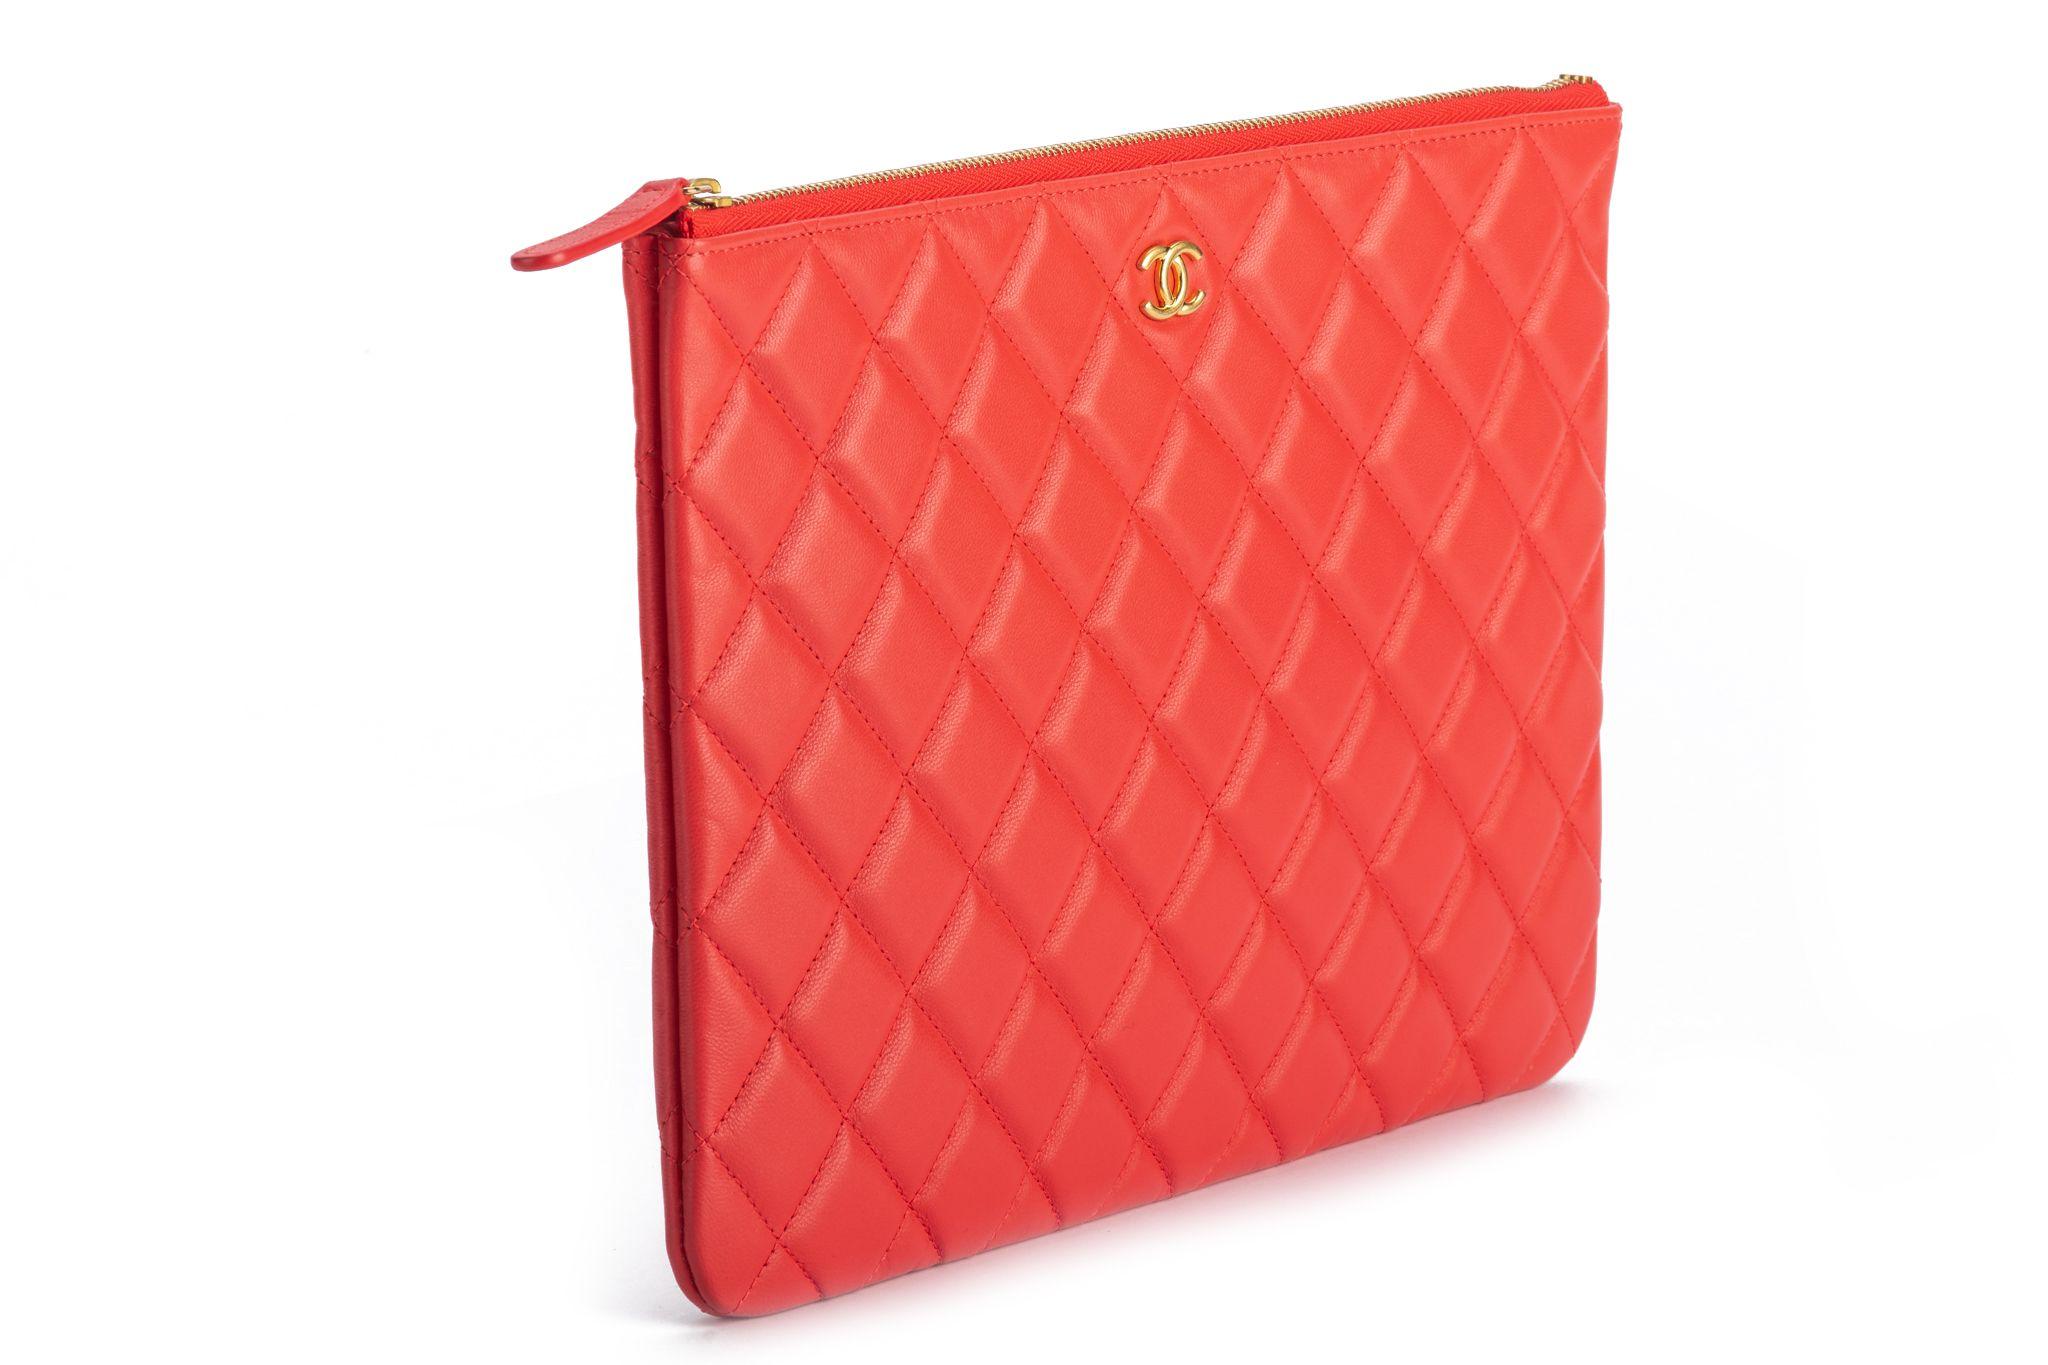 Chanel quilted lambskin coral red clutch with gold tone hardware. New with booklet, hologram, ID card and original dust cover. Collection 27.
